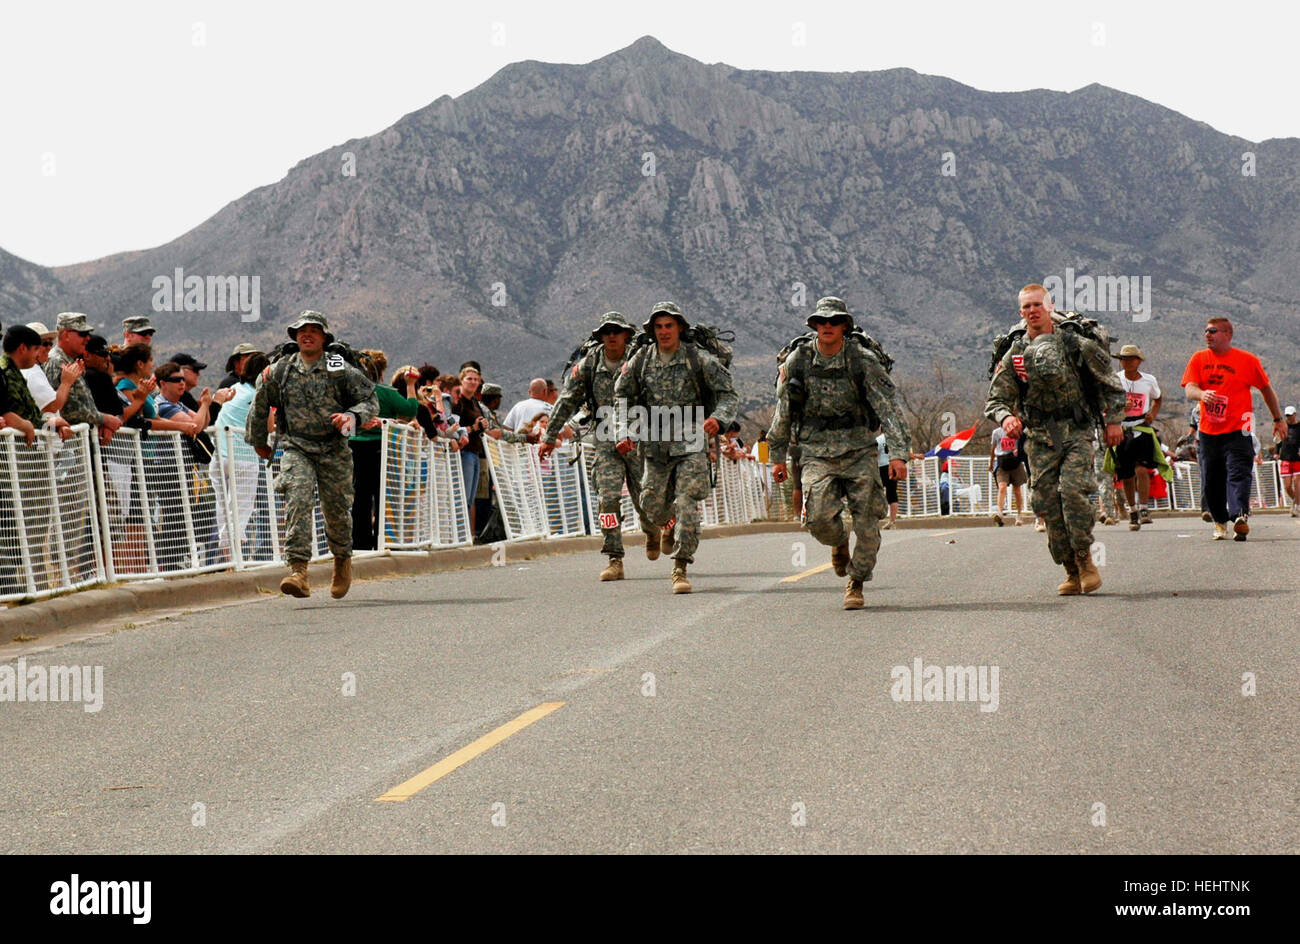 Team Juggernaut, made up of five soldiers from Green Bay-based Company B, 2-127th Infantry, crosses the finish line in first place in the National Guard Heavy category at the 20th Annual Bataan Memorial Death March marathon, White Sands Missile Range, N.M., March 29, 2009. Team members are Spc. Andrew Vannieuwehoven, Green Bay; Pfc. Jesse Tlachac, Sturgeon Bay; Sgt. Ryan Gries, Madison; Pfc. Eric Sallenbach, Green Bay; and Pfc. Kyle Cooper, Appleton. U.S. Army photo. Flickr - The U.S. Army - Team Juggernaut Stock Photo